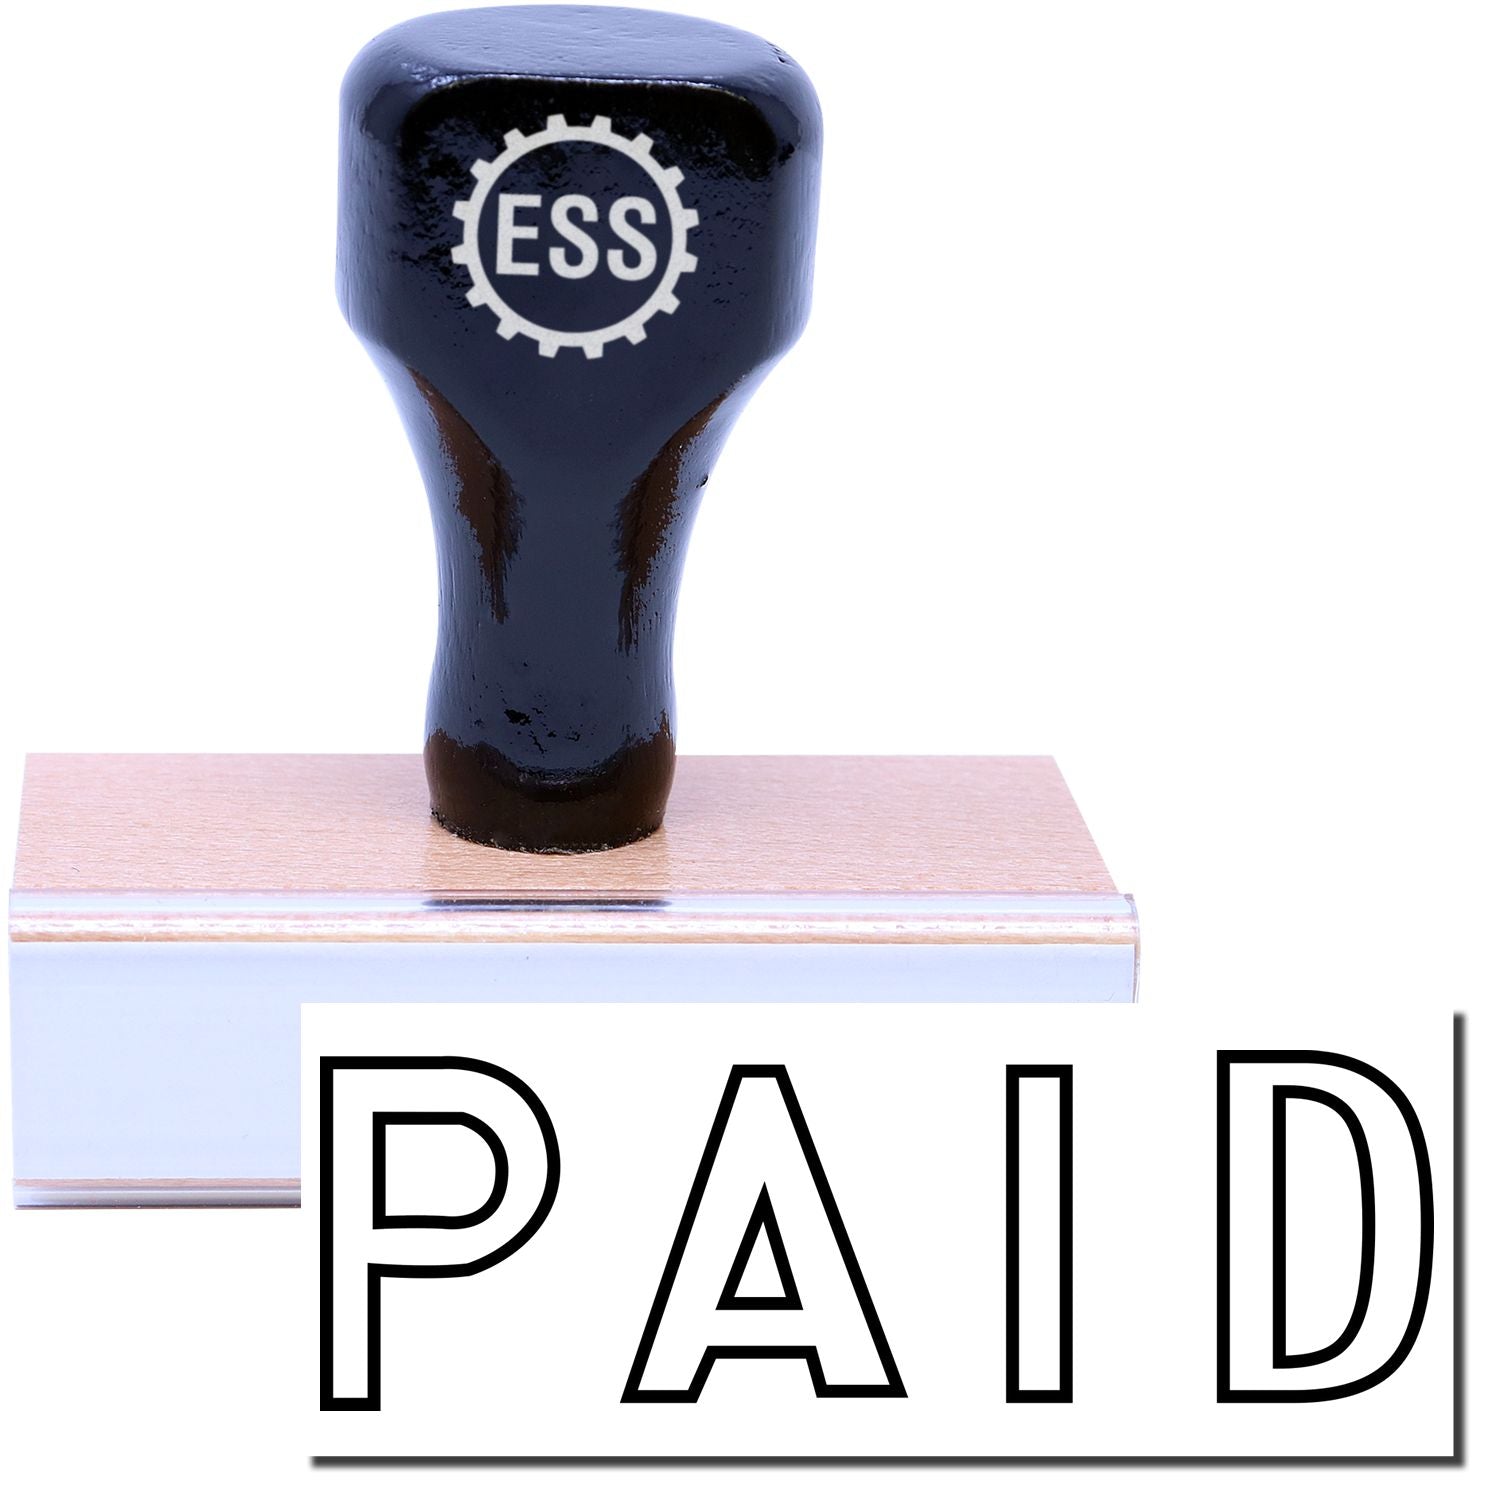 A stock office rubber stamp with a stamped image showing how the text "PAID" in a large outline font is displayed after stamping.